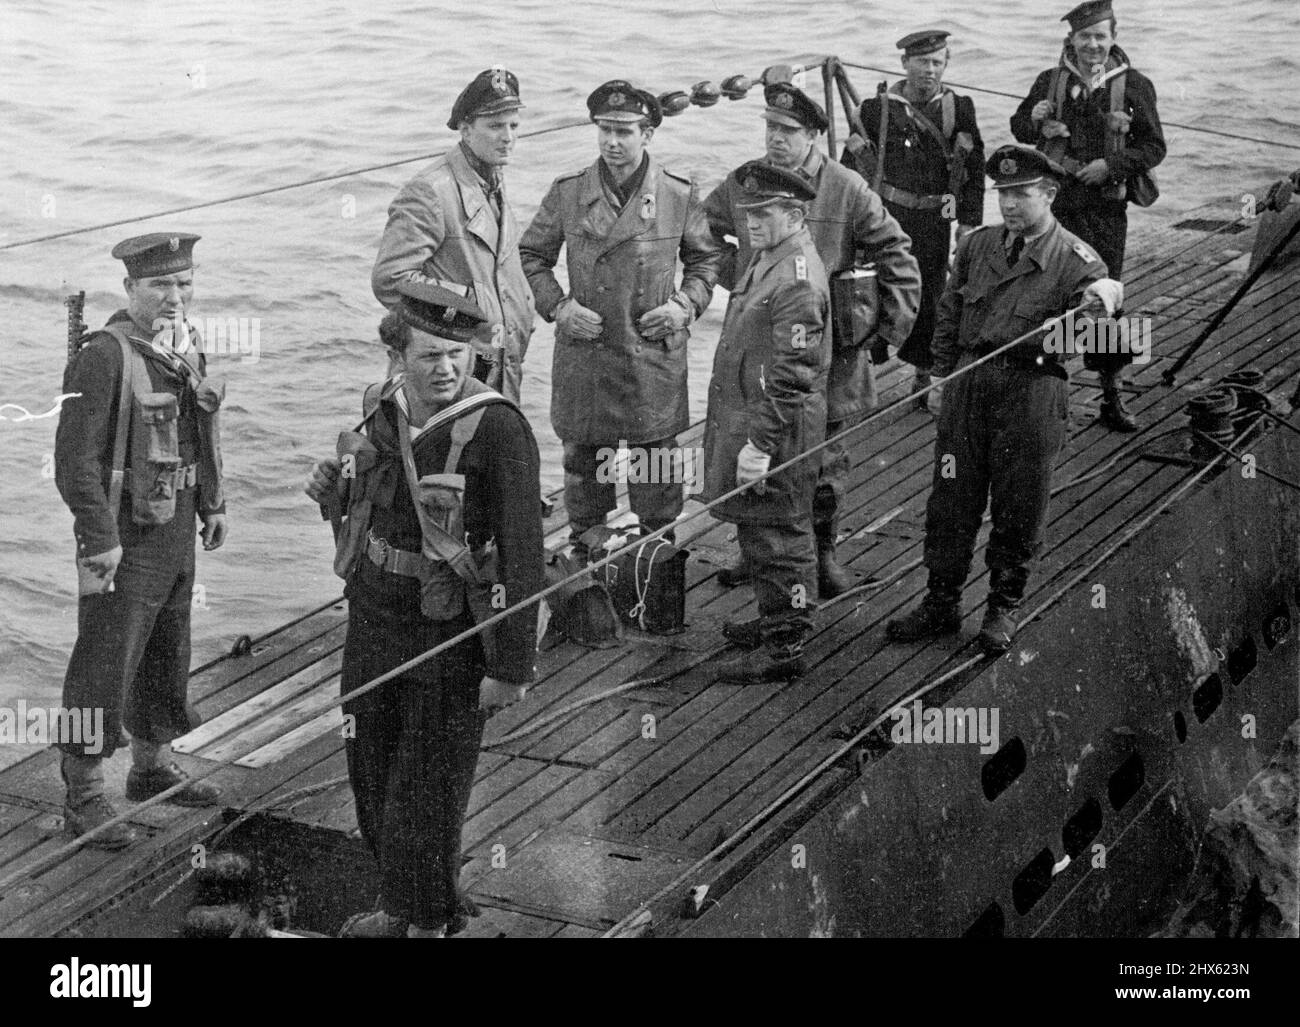 The First German U-Boat Surrenders At Weymouth - The German officers on board the U 249 after the surrender, and guarded by men of the Polish Navy. The first German U-boat - the U 249 surrendered and was taken in charge by the British Navy off Weymouth, Dorset. Five German officers of Ober-Lieut. Kock, were on board when Commander N.J. Weir, R.N., went on board to received the surrenders. May 11, 1945. (Photo by Andrews Planet).;The First German U-Boat Surrenders At Weymouth - The German officer Stock Photo